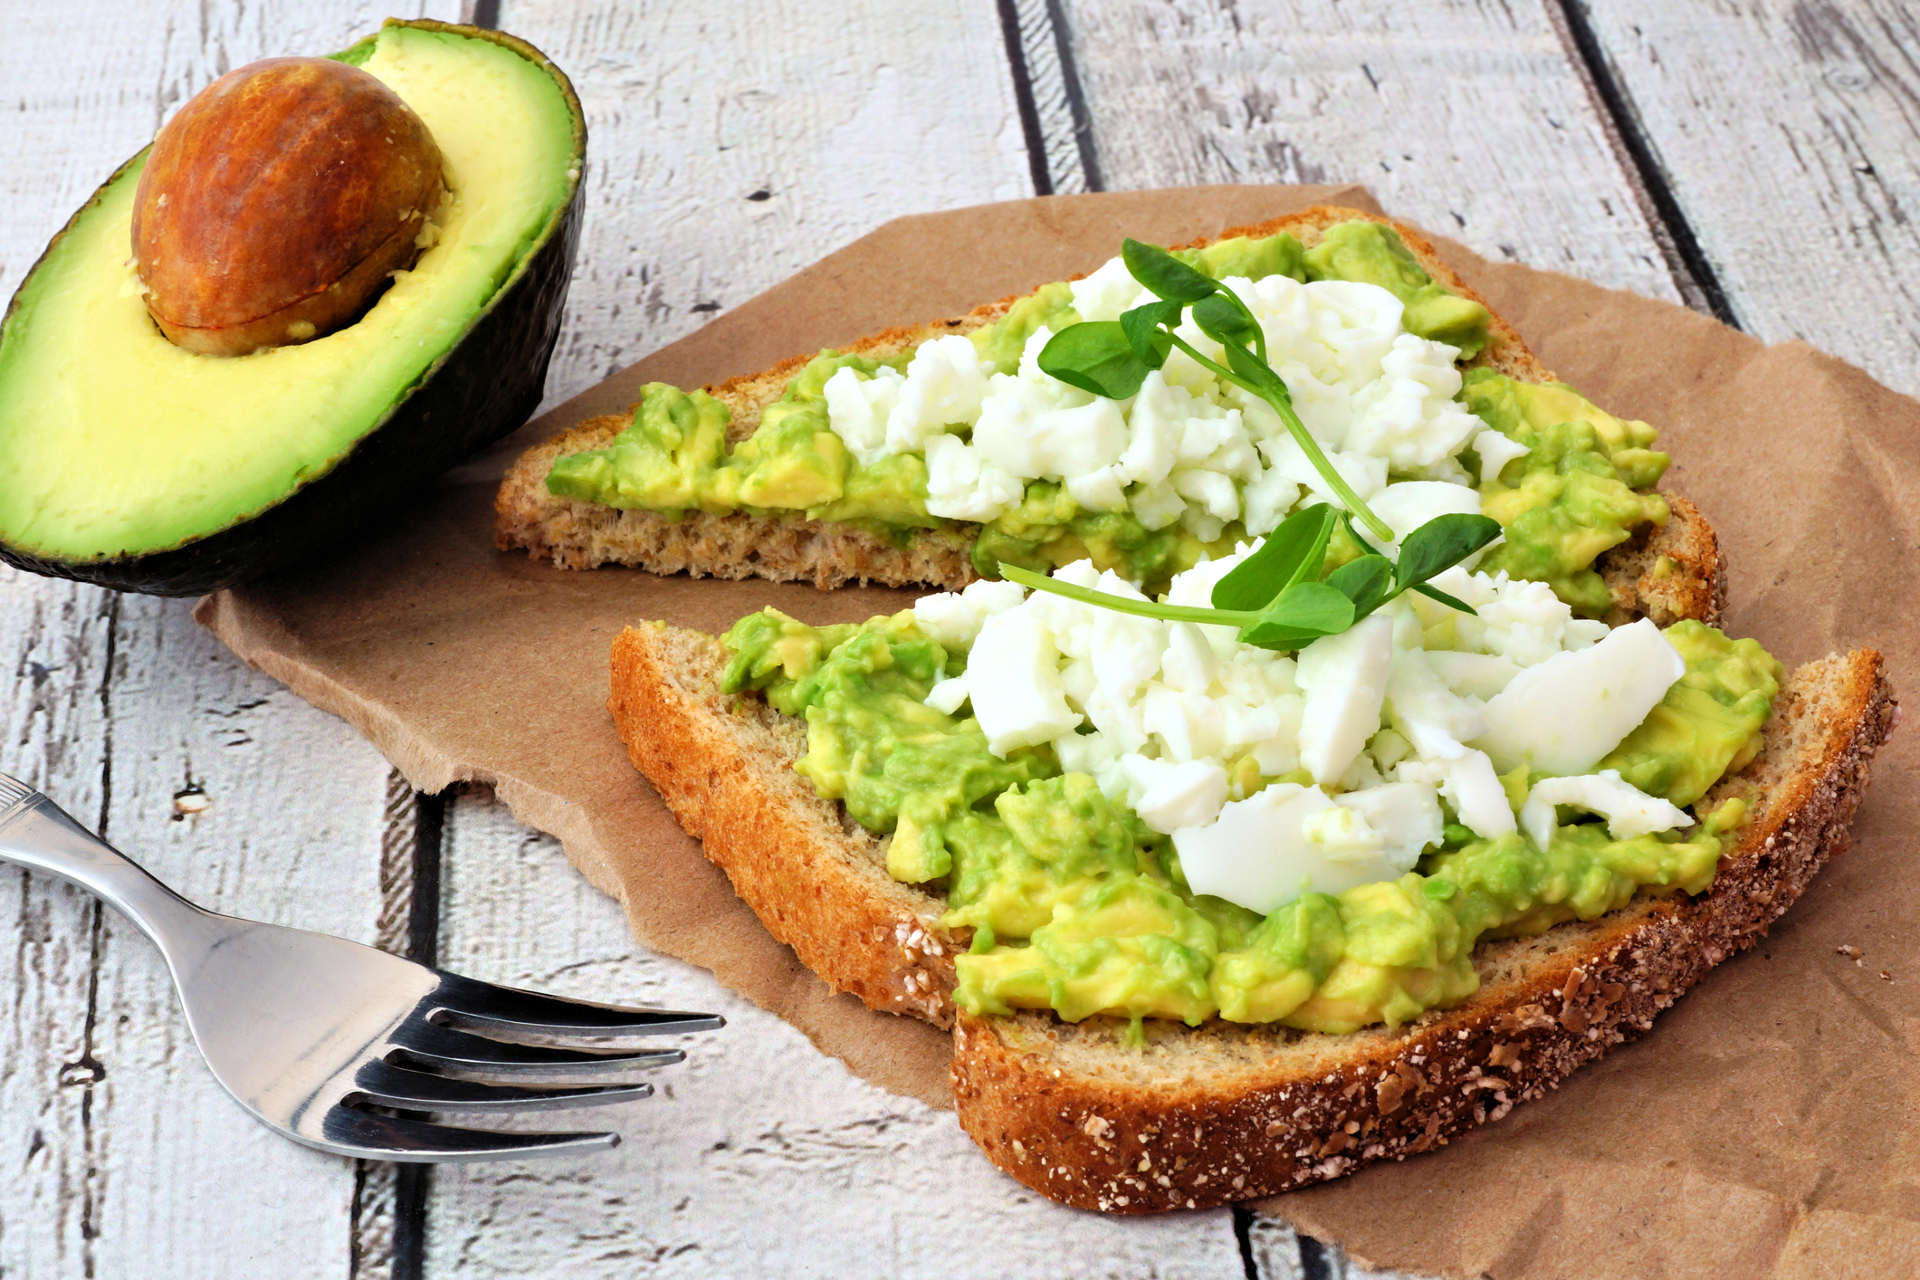 Why Avocados Are So Good For You [Infographic]